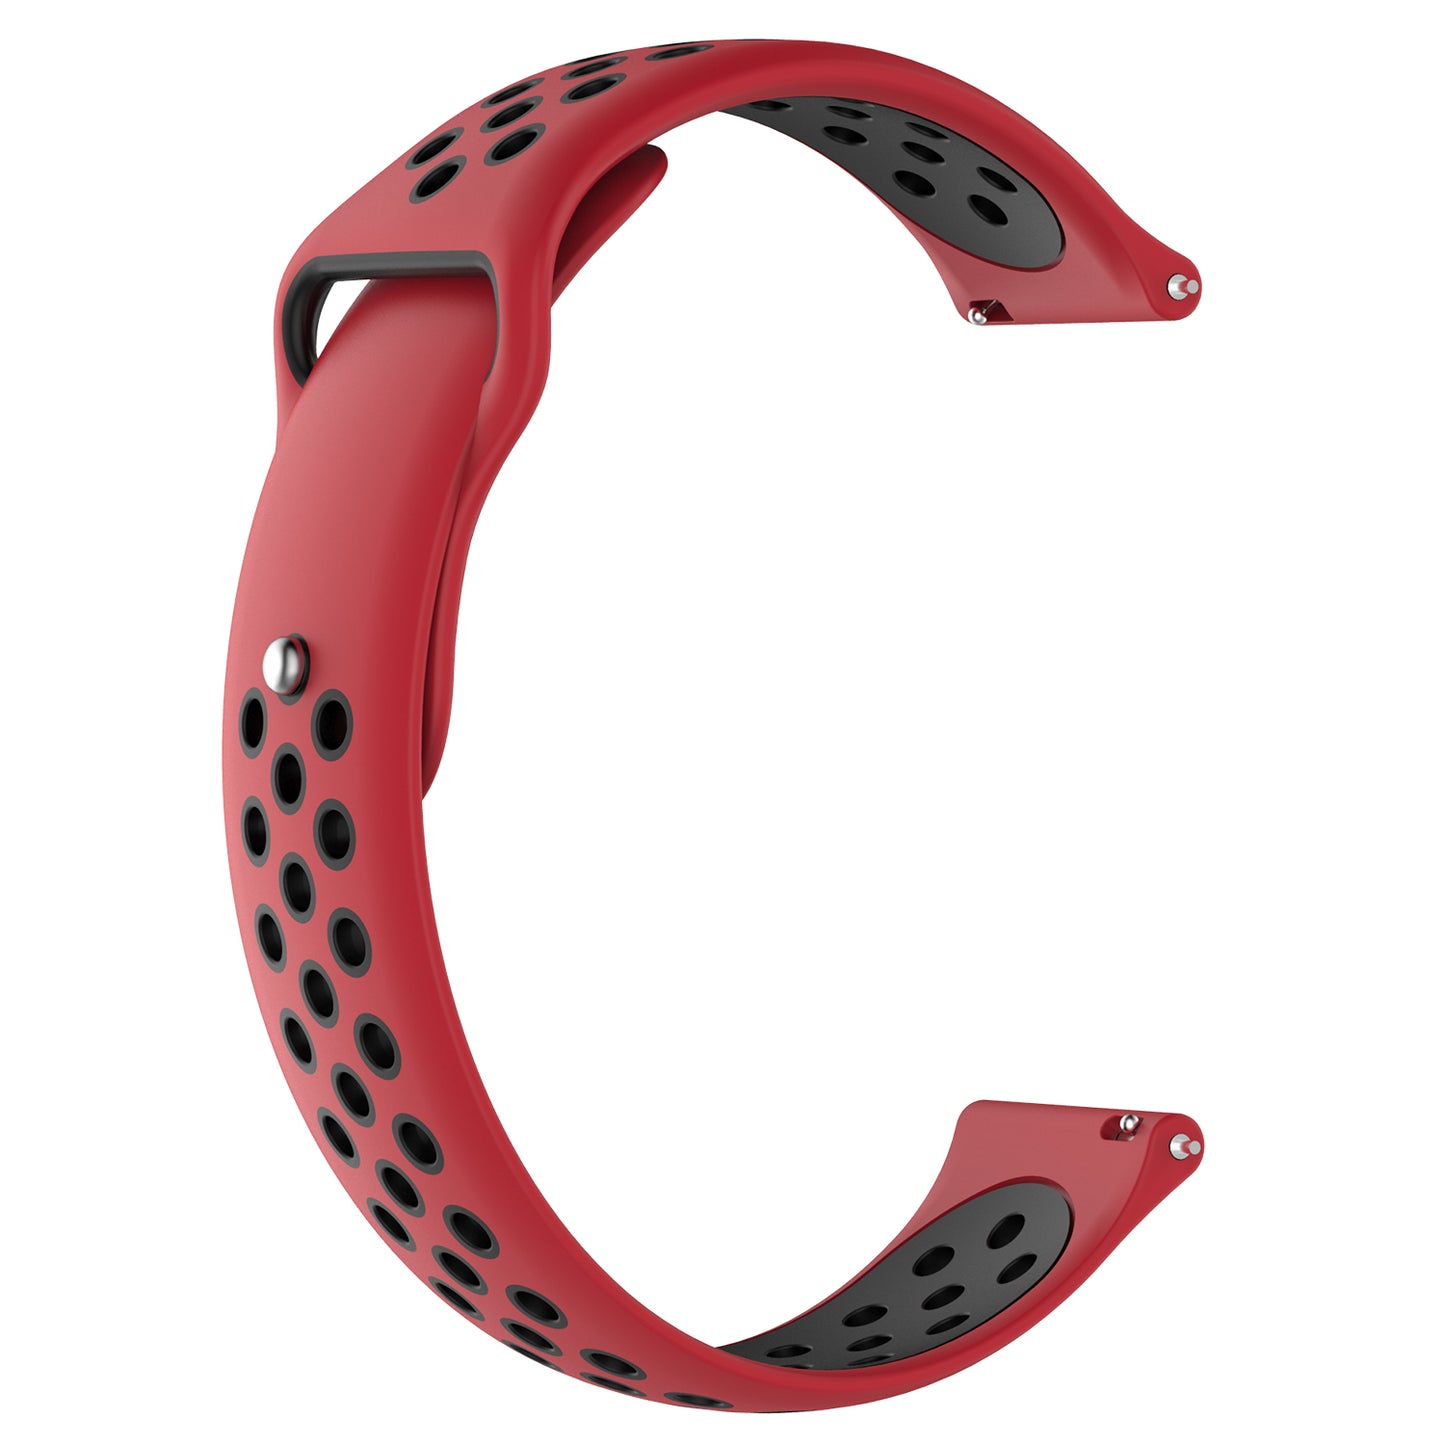 Perforated Rubber Strap for Samsung Galaxy Watch Active2